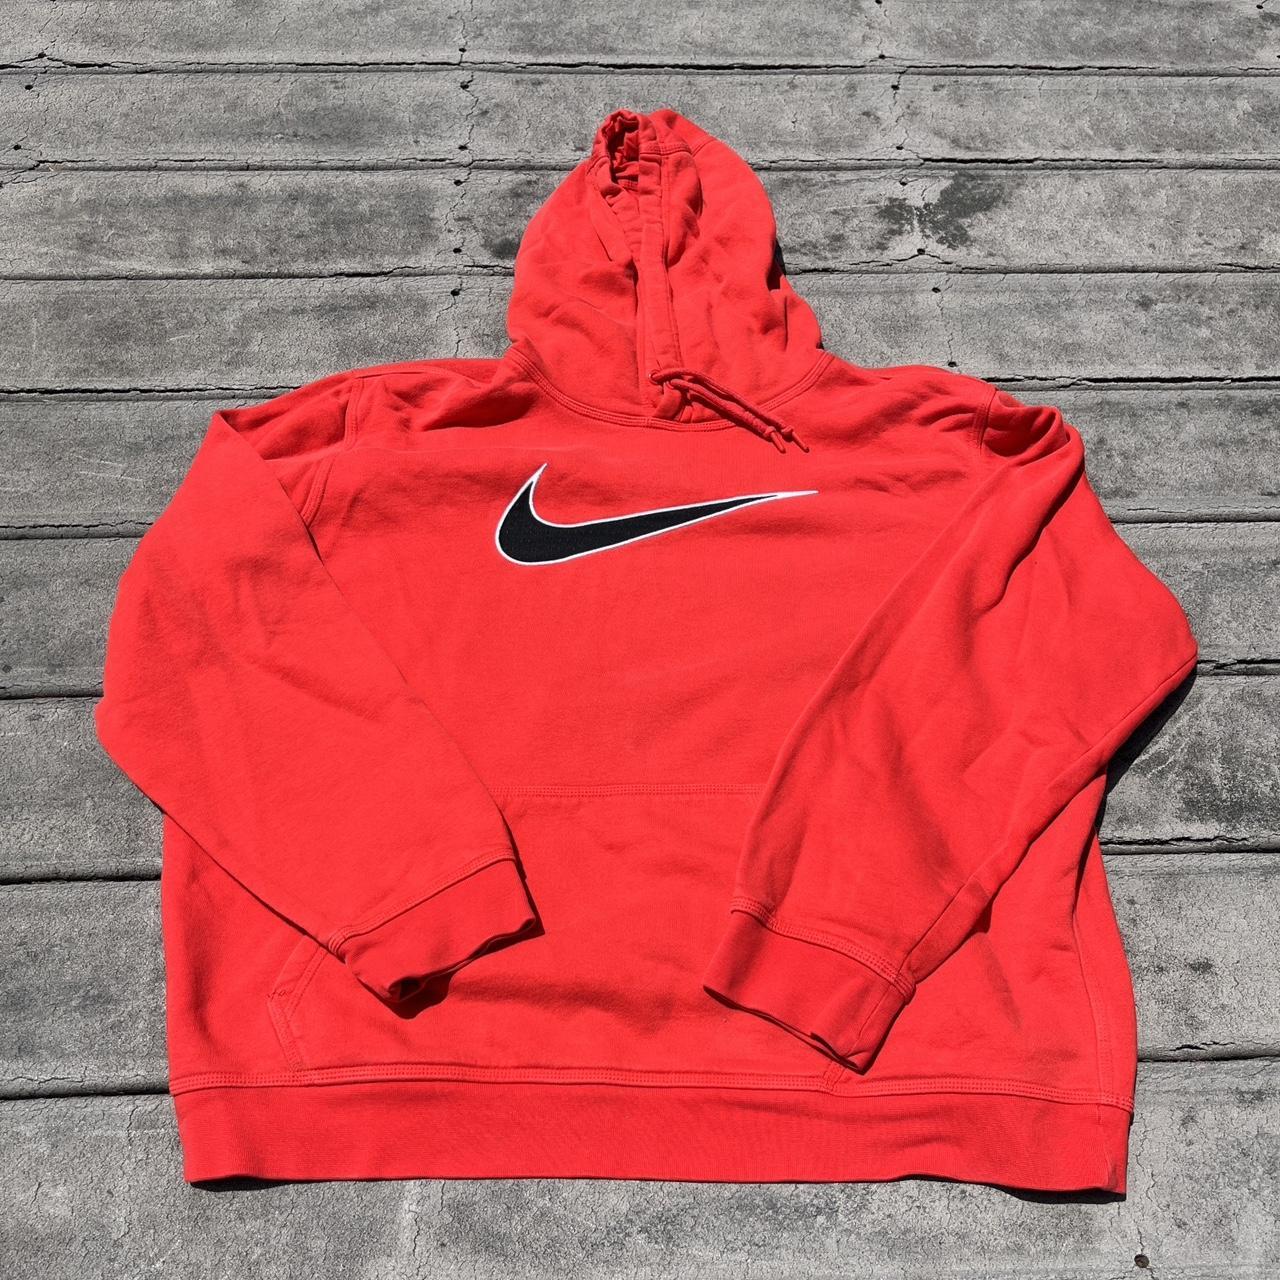 Red Center swoosh Nike hoodie. The perfect... - Depop